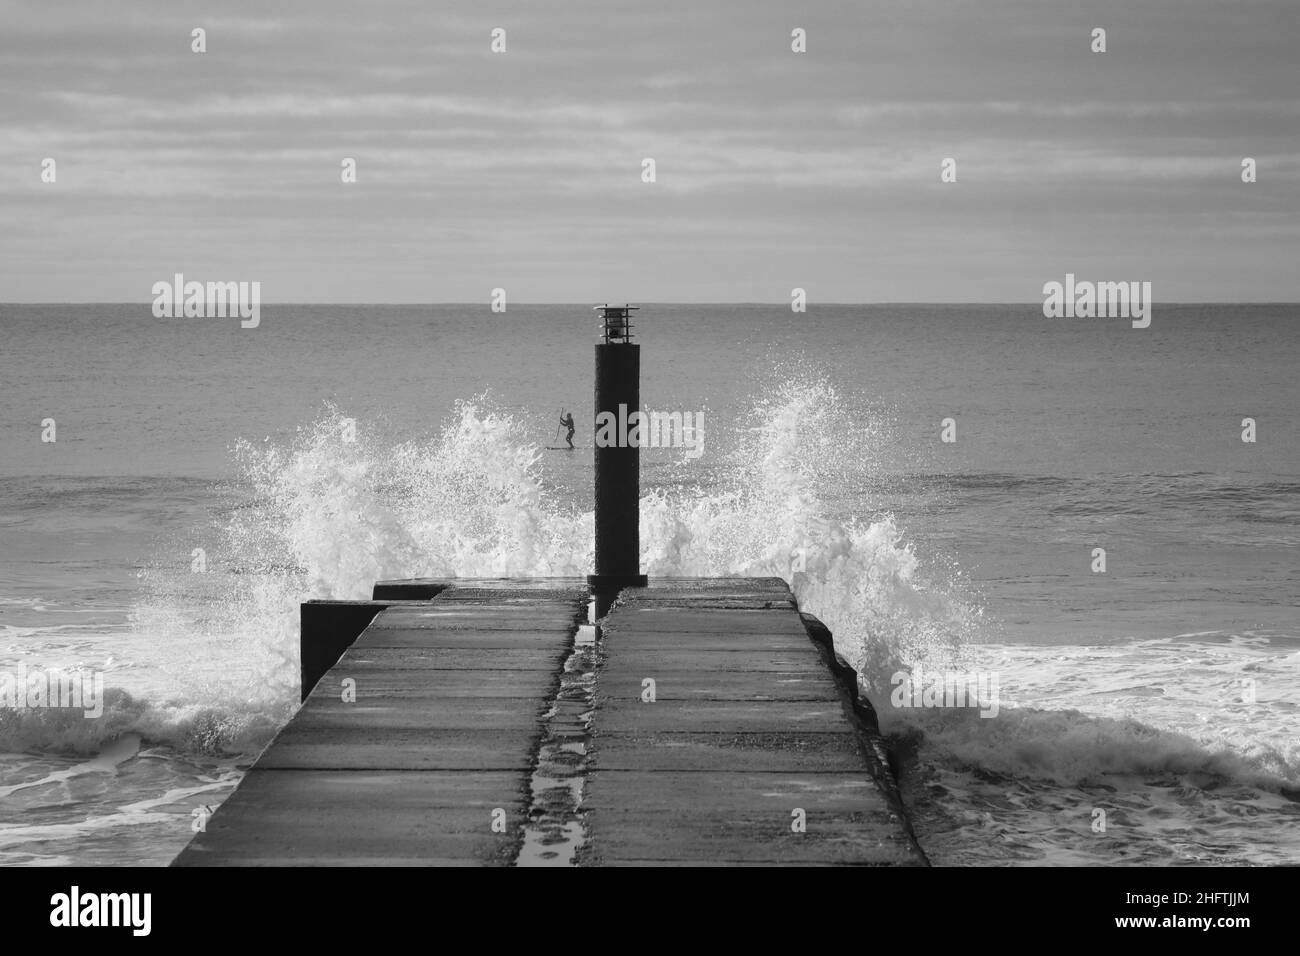 big ocean wave hit in a jetty in a stormy day Stock Photo